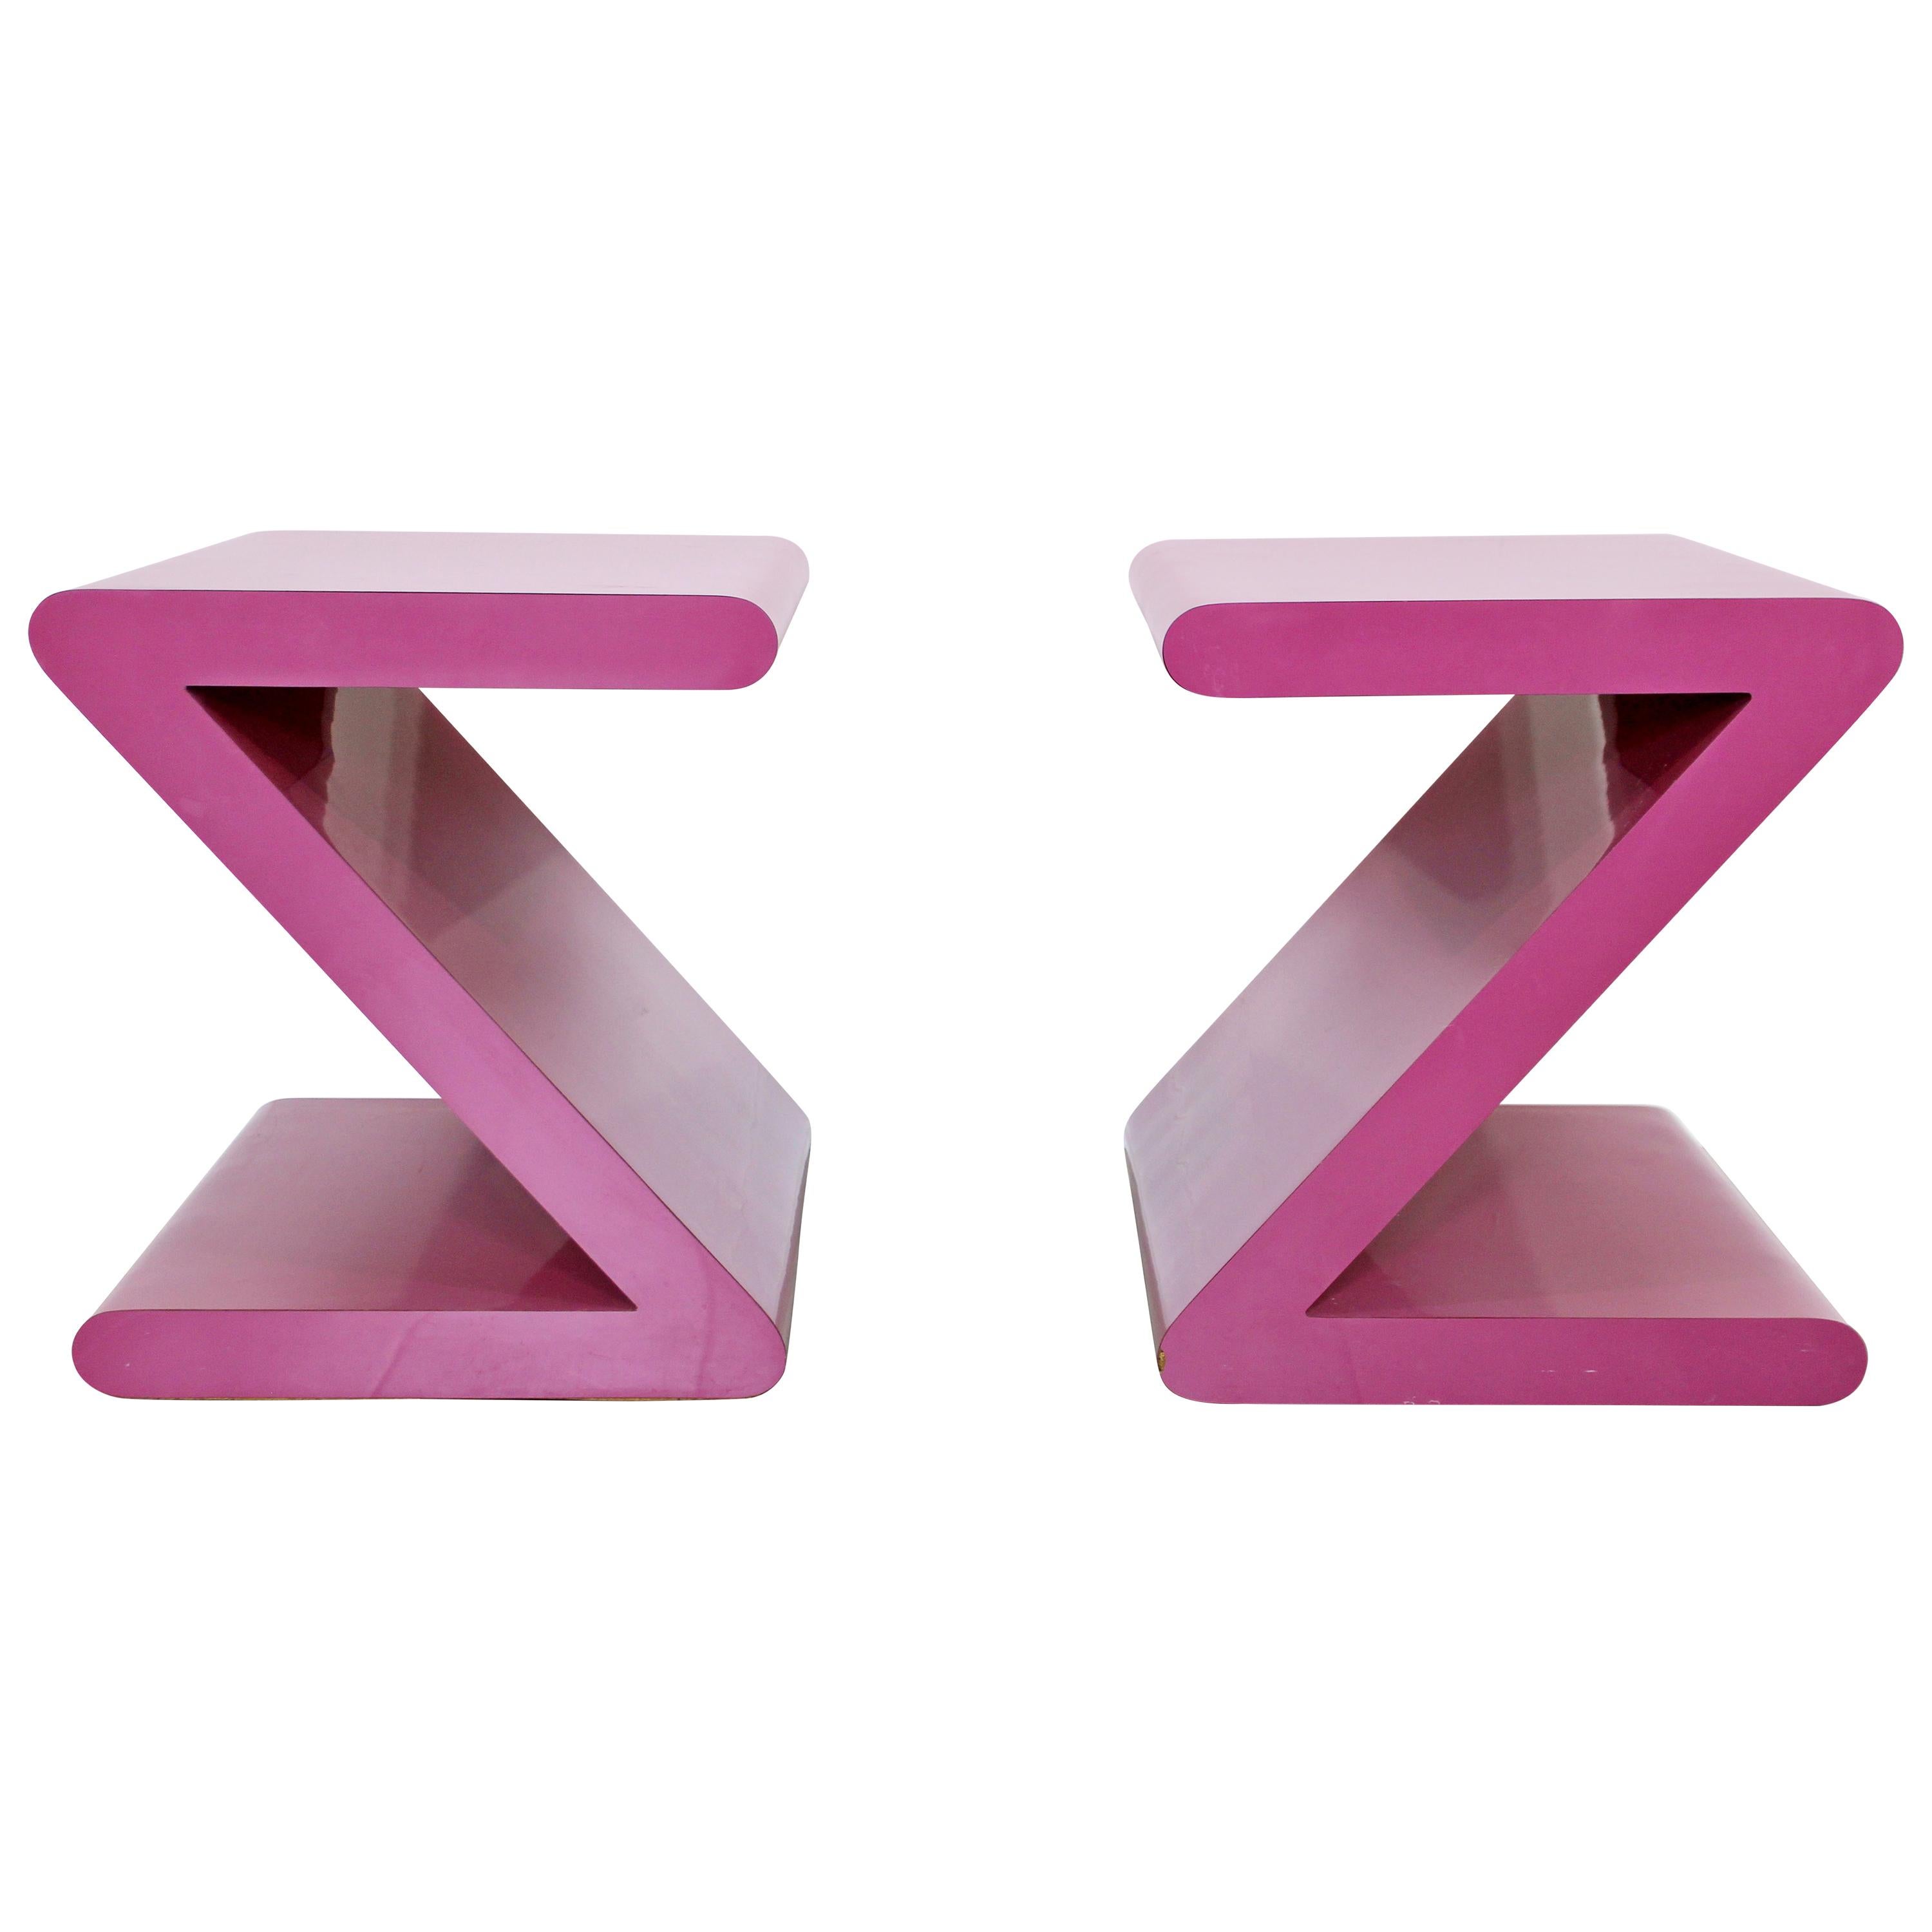 Contemporary Modern Pair of Acrylic Z-Shaped Side End Tables 1980s Pink